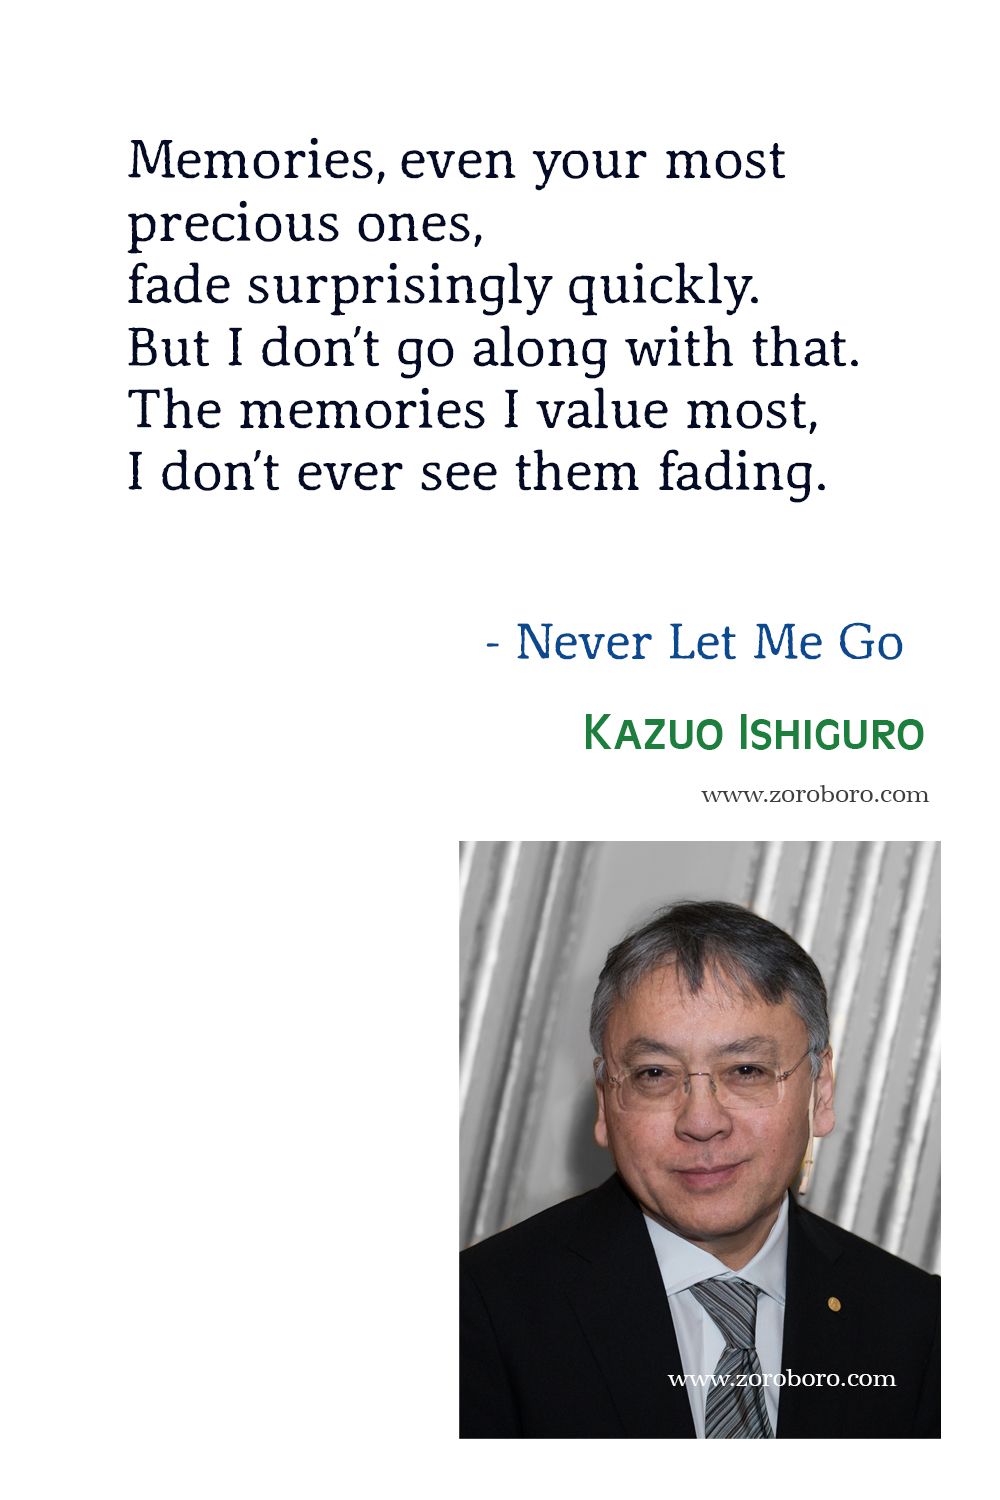 Kazuo Ishiguro Quotes, Kazuo Ishiguro Never Let Me Go Quotes, Kazuo Ishiguro Books Quotes, Kazuo Ishiguro The Remains of the Day Quotes.